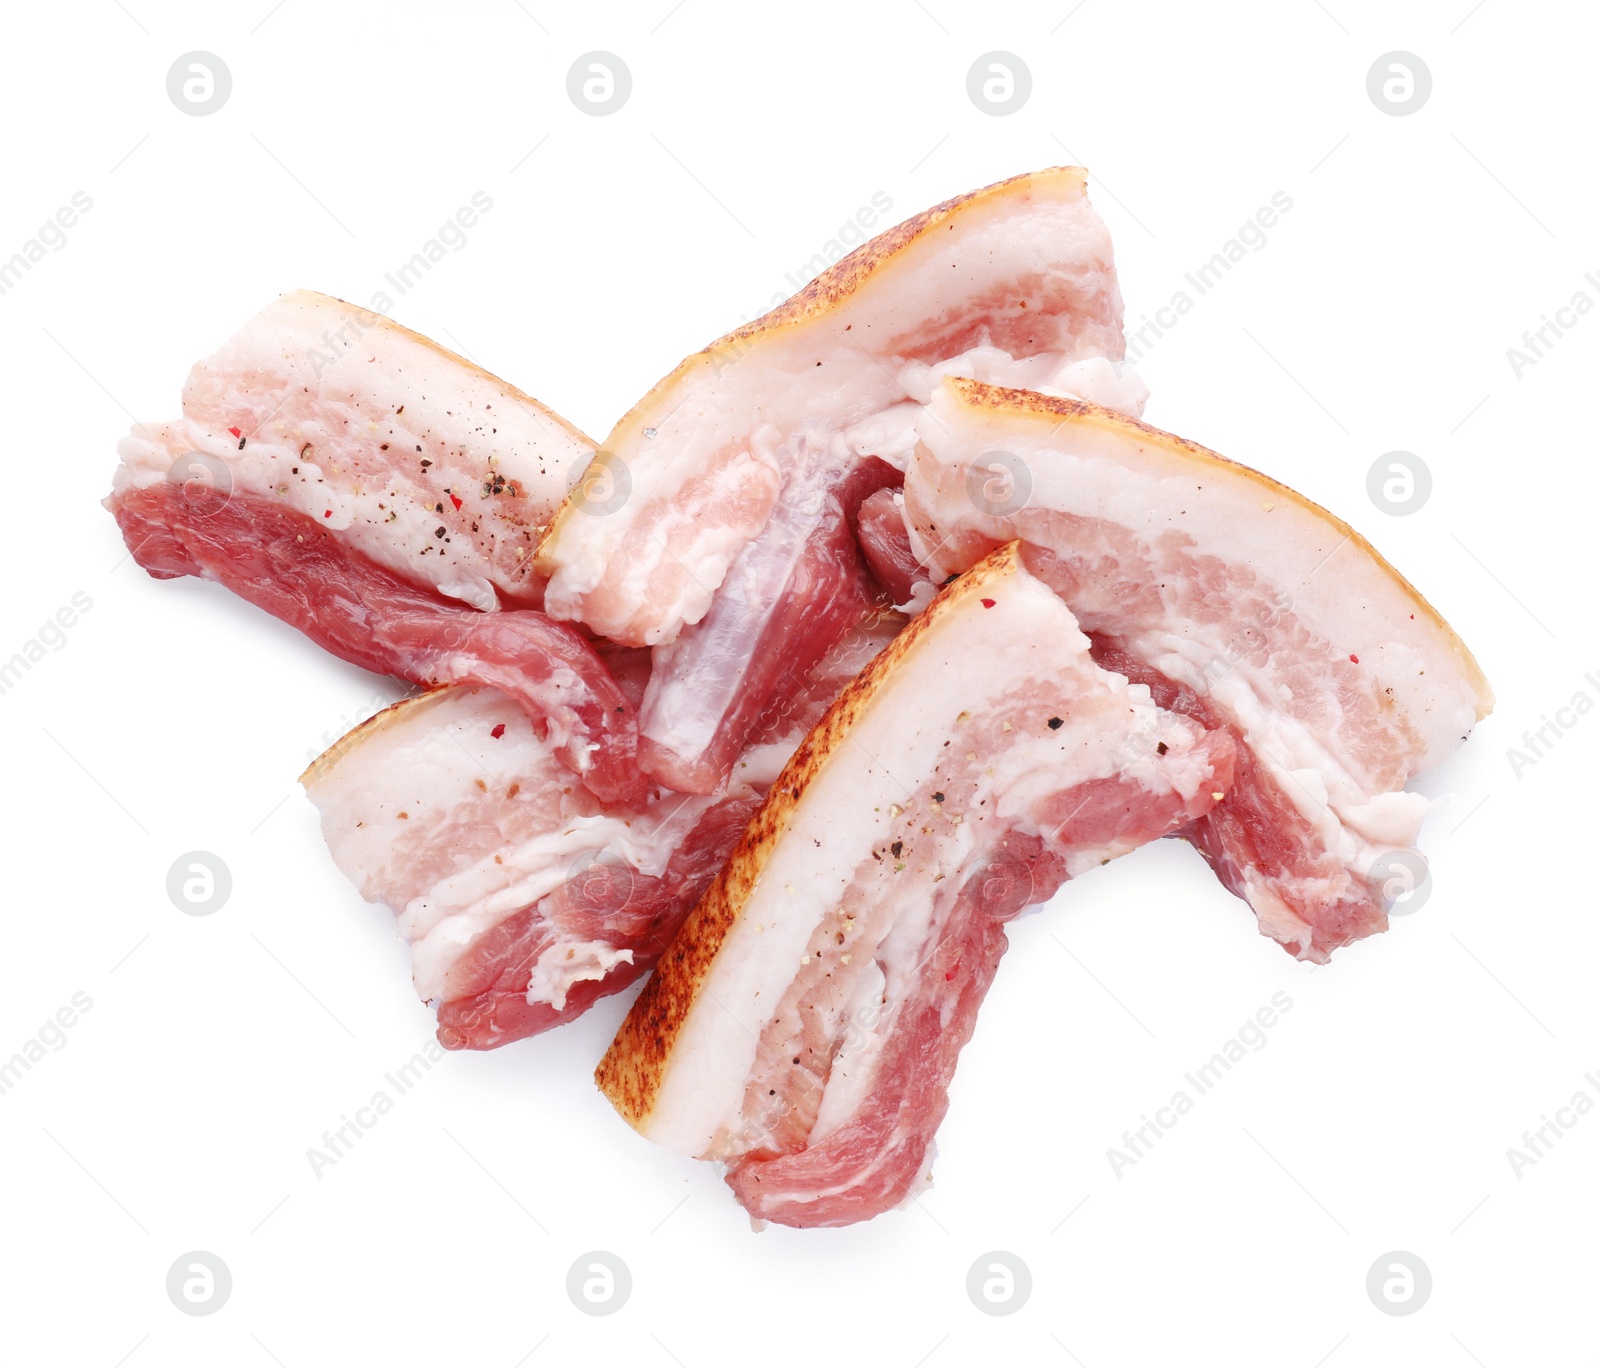 Photo of Slices of tasty pork fatback with spices on white background, top view